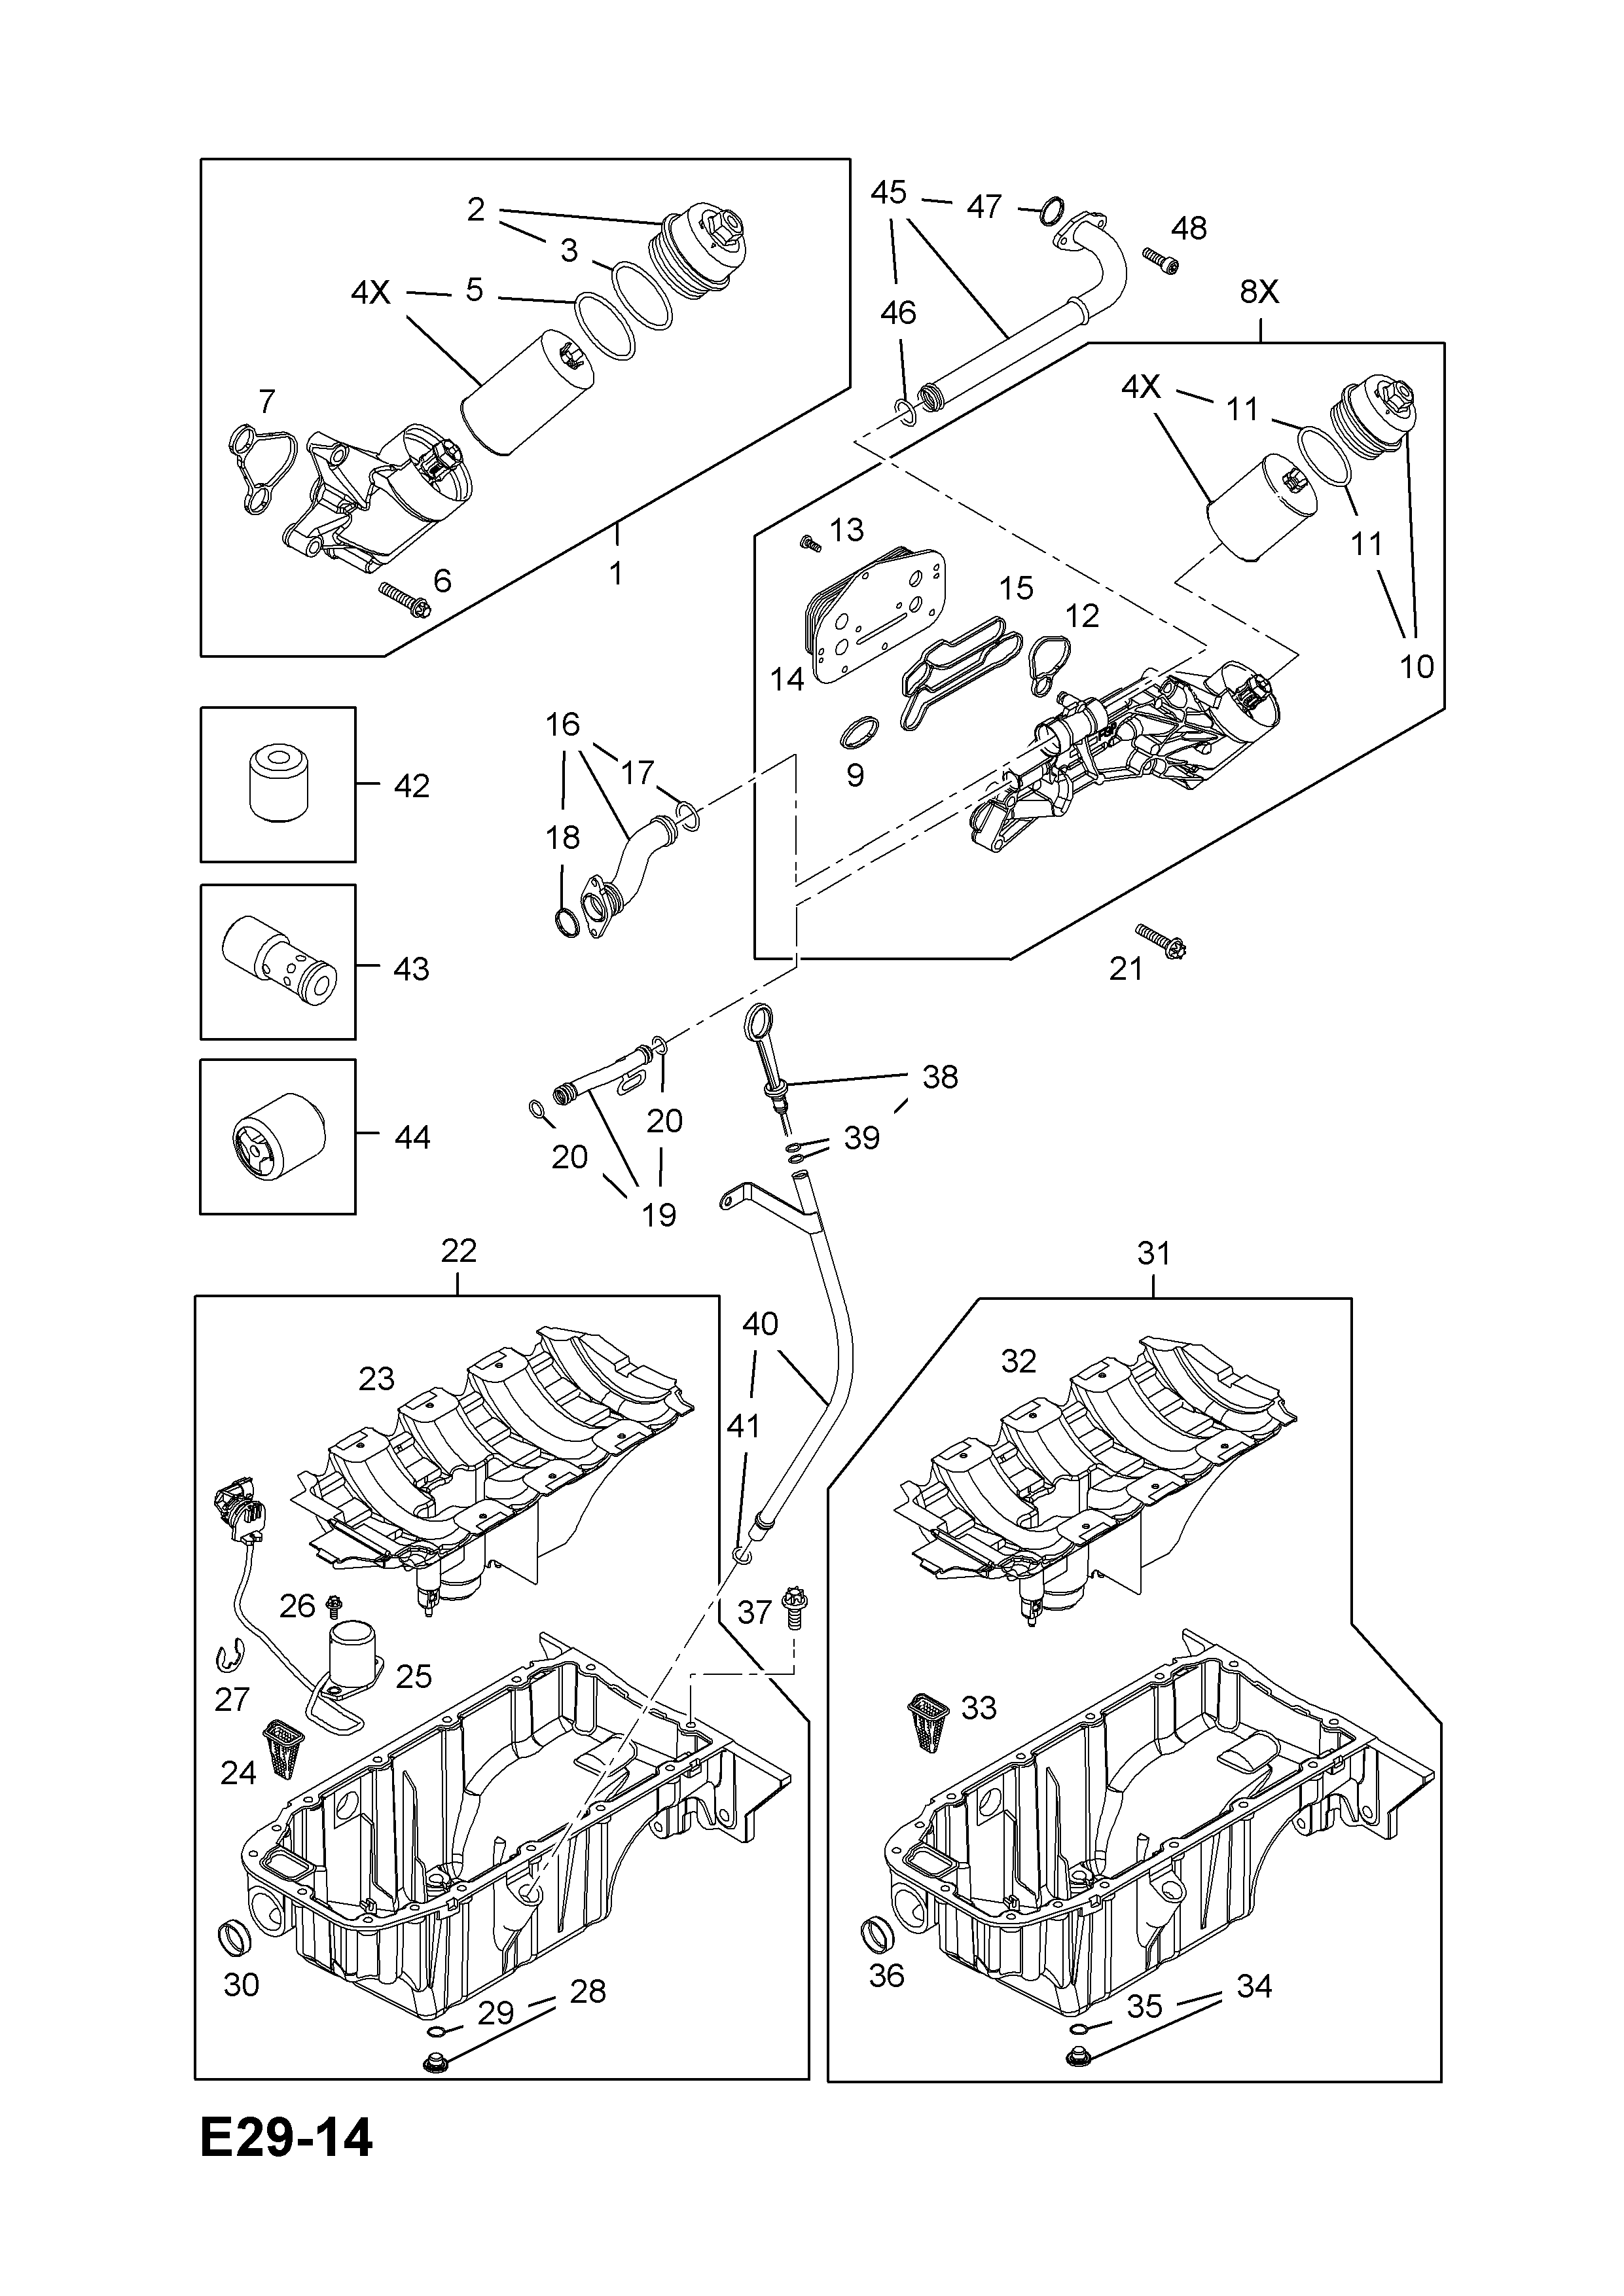 OIL PAN AND FITTINGS